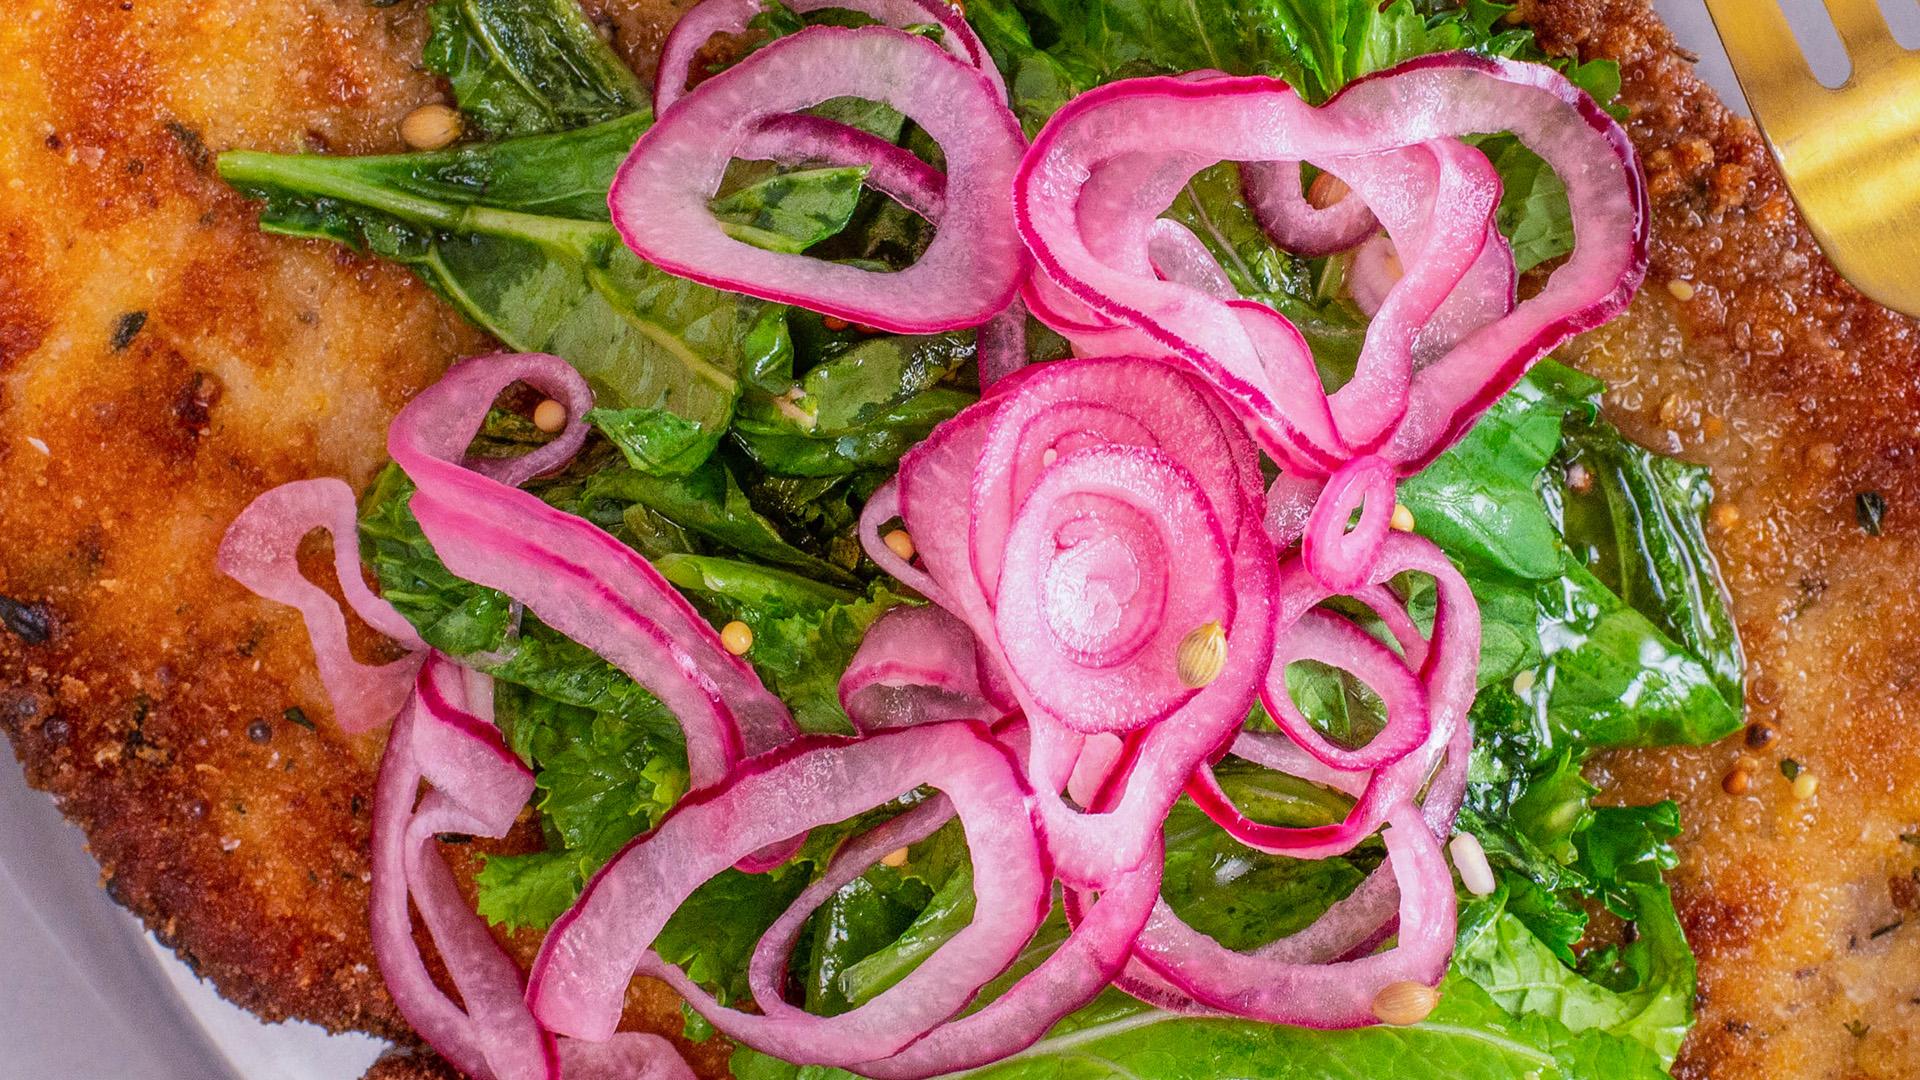 How To Make Quick-pickled Red Onions Or Shallots By - Side Dish , HD Wallpaper & Backgrounds